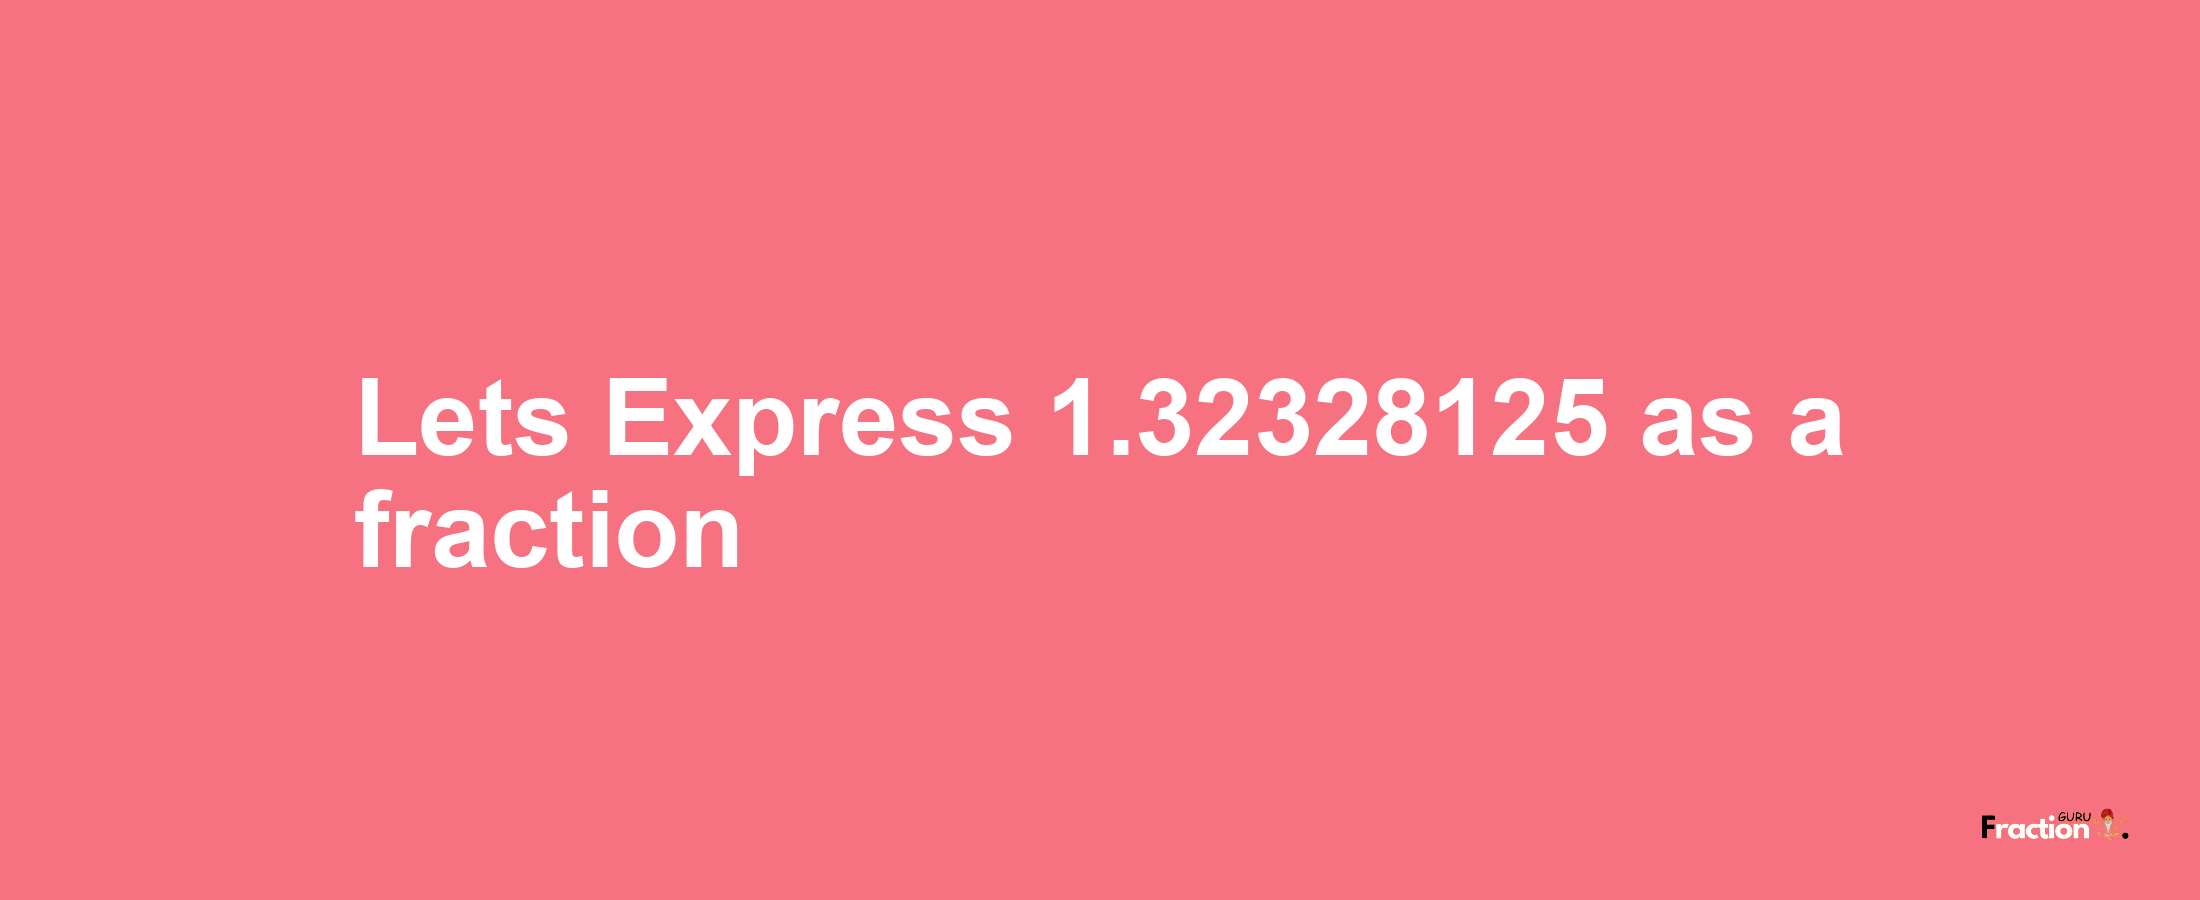 Lets Express 1.32328125 as afraction